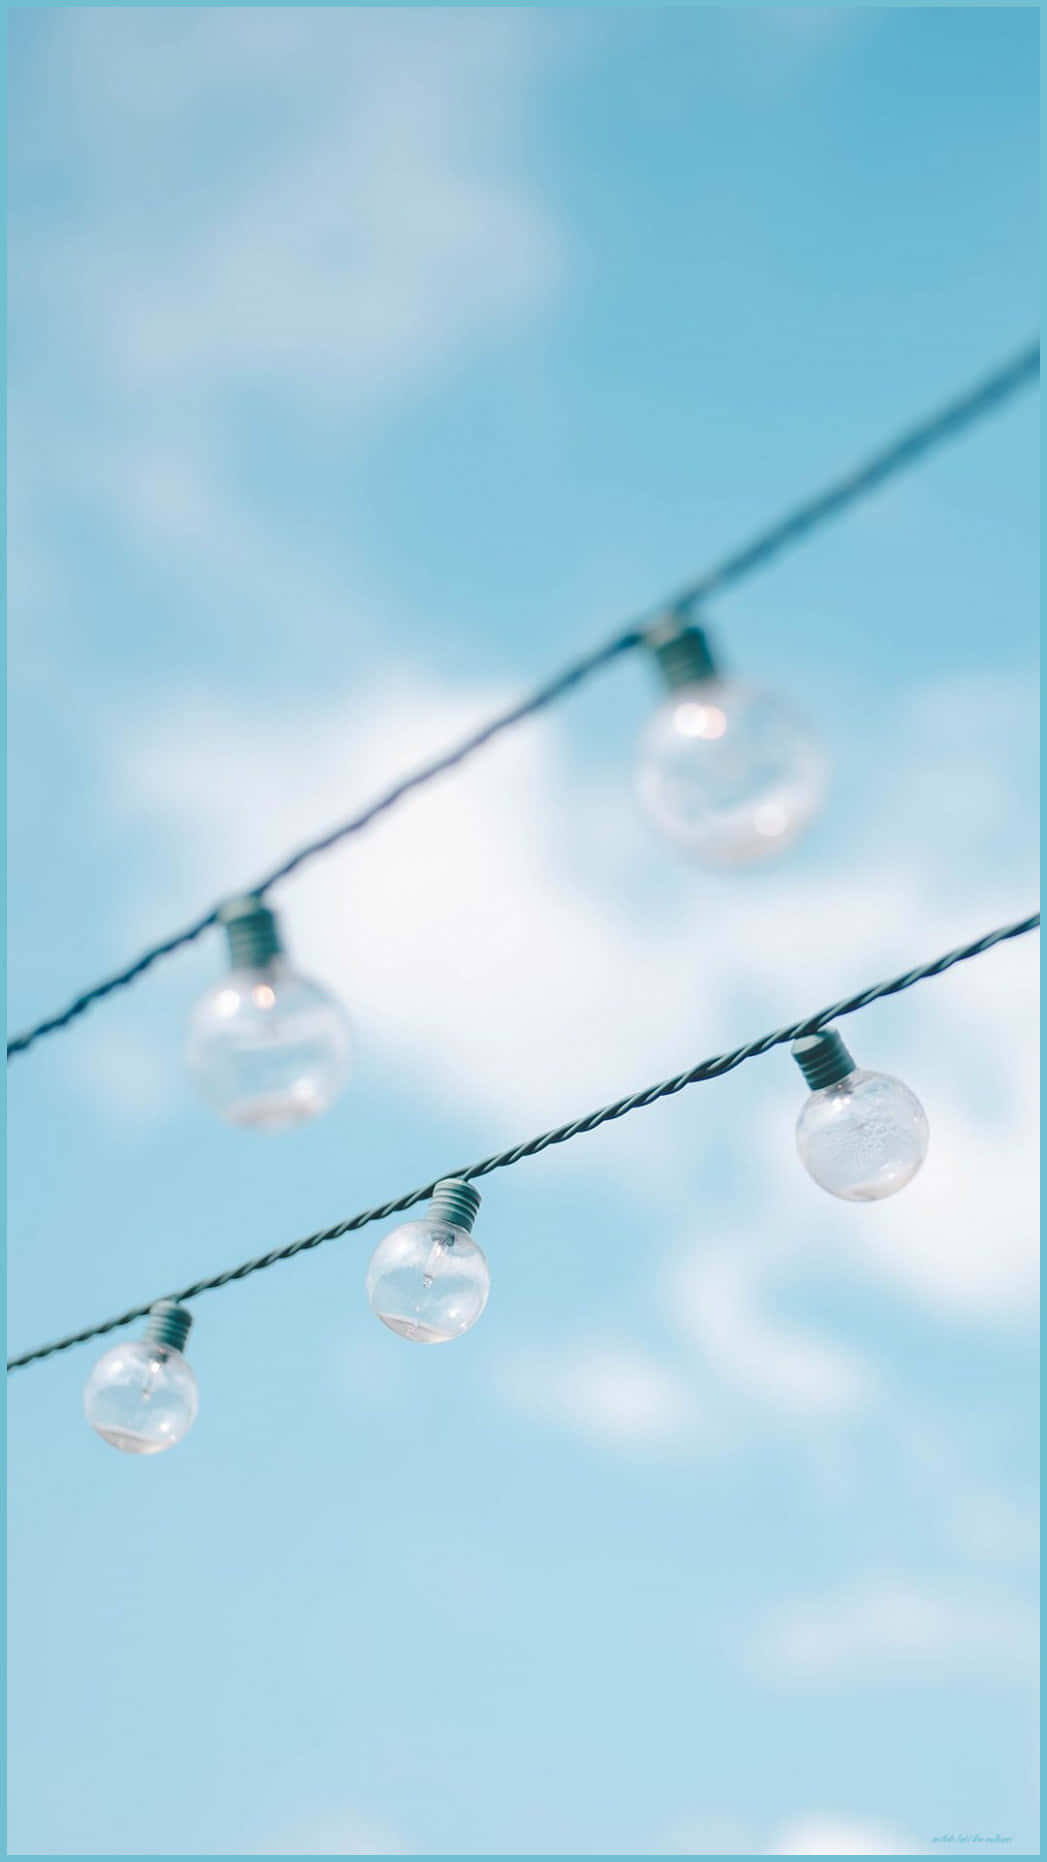 A String Of Lights With Blue Sky Behind Them Wallpaper